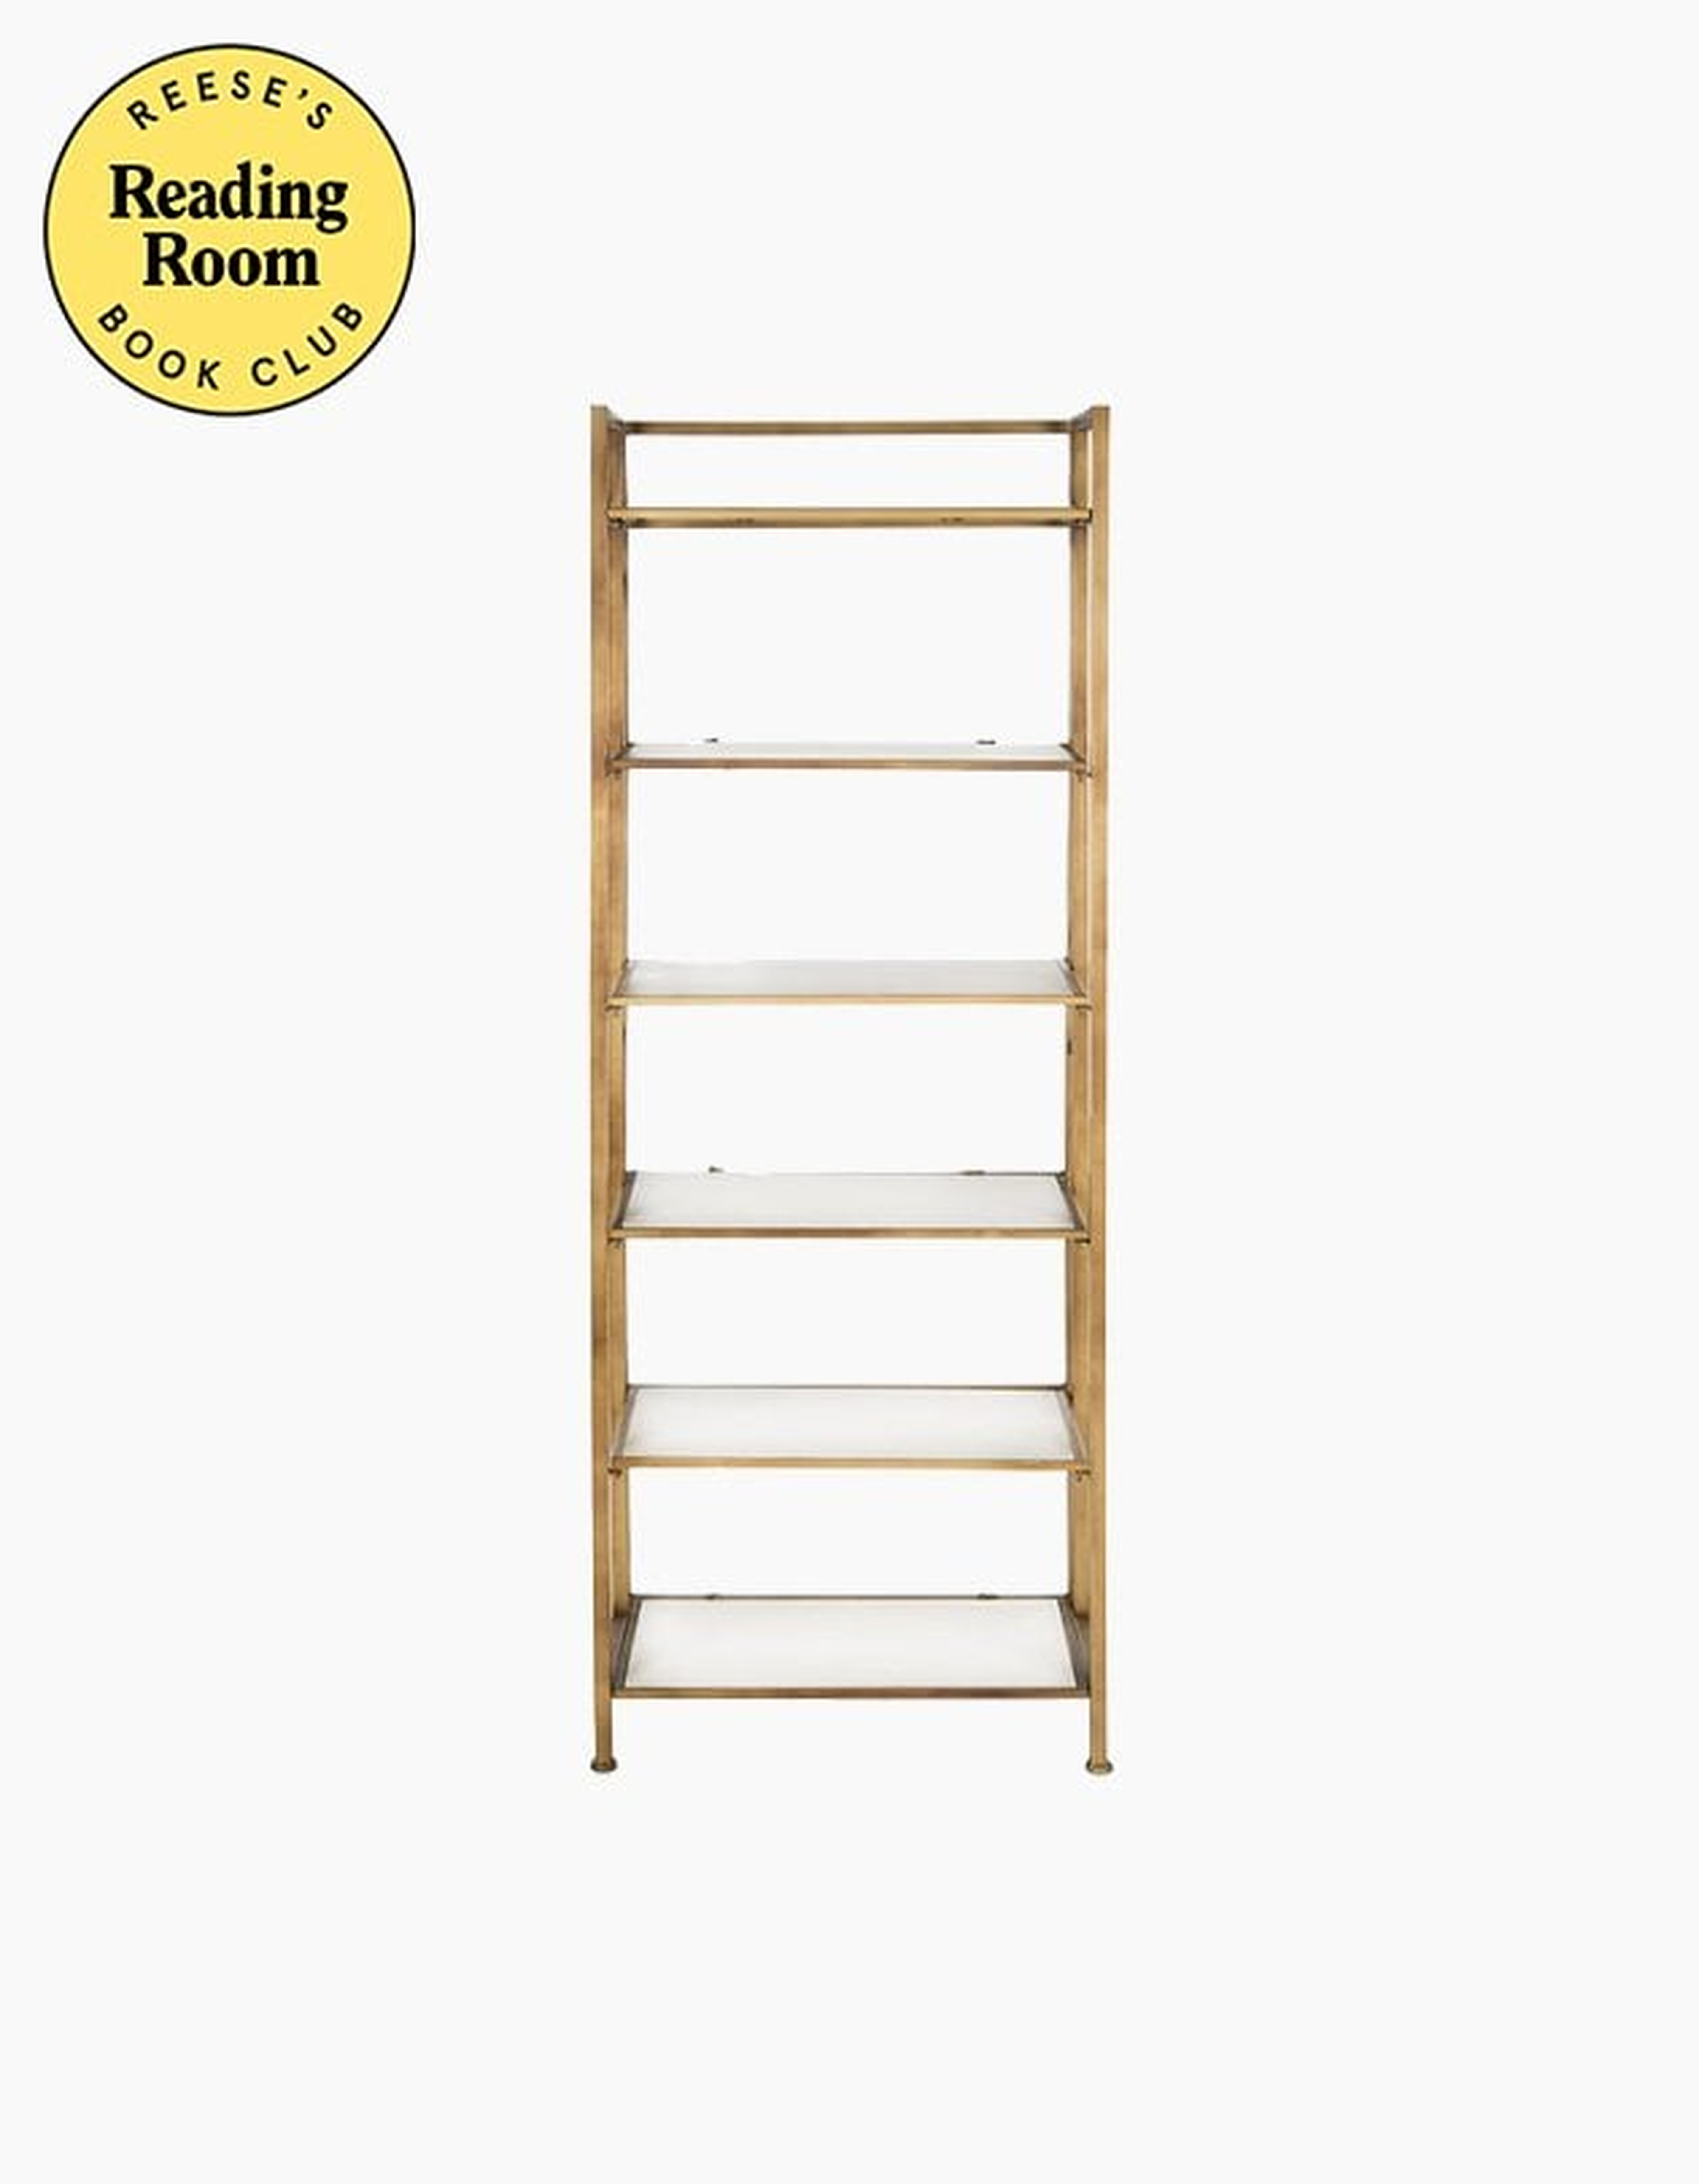 Anthology Etagere - Reese's Book Club x Havenly